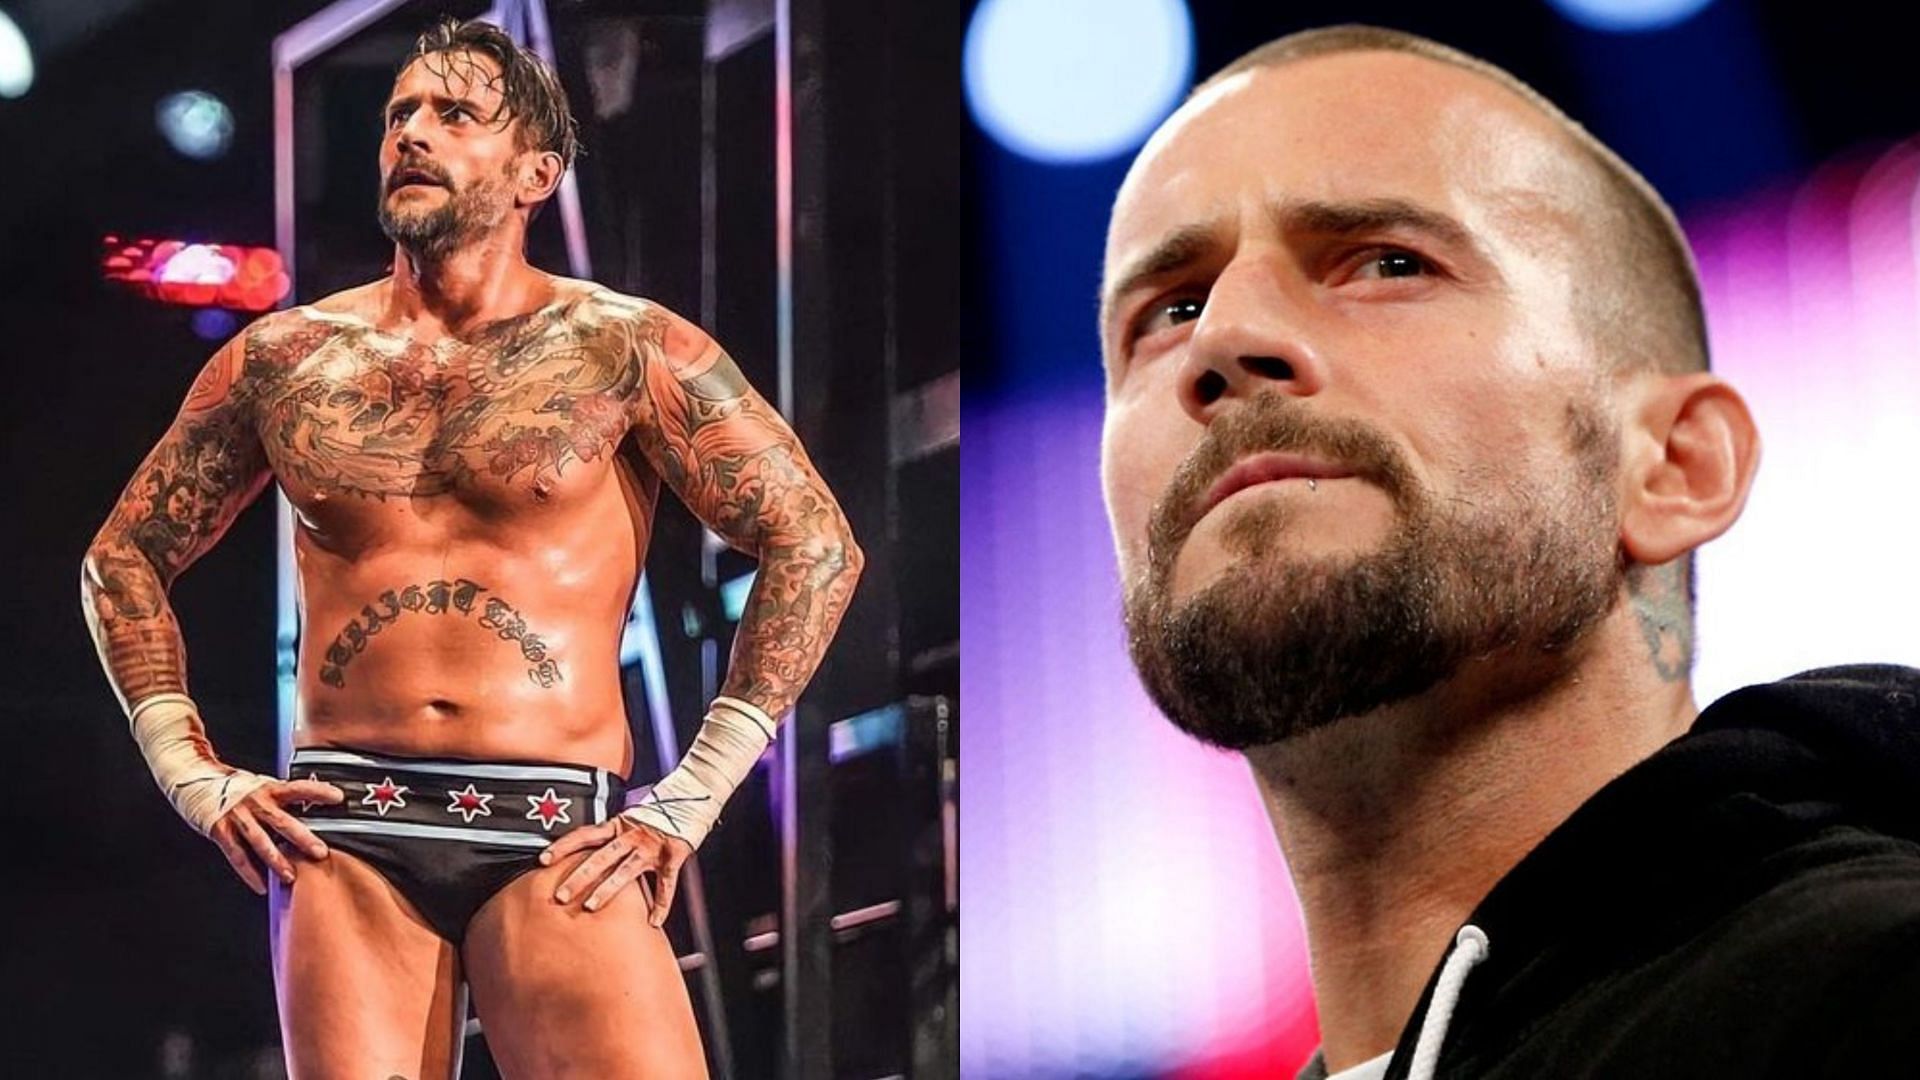 Will CM Punk return to WWE after his AEW release?